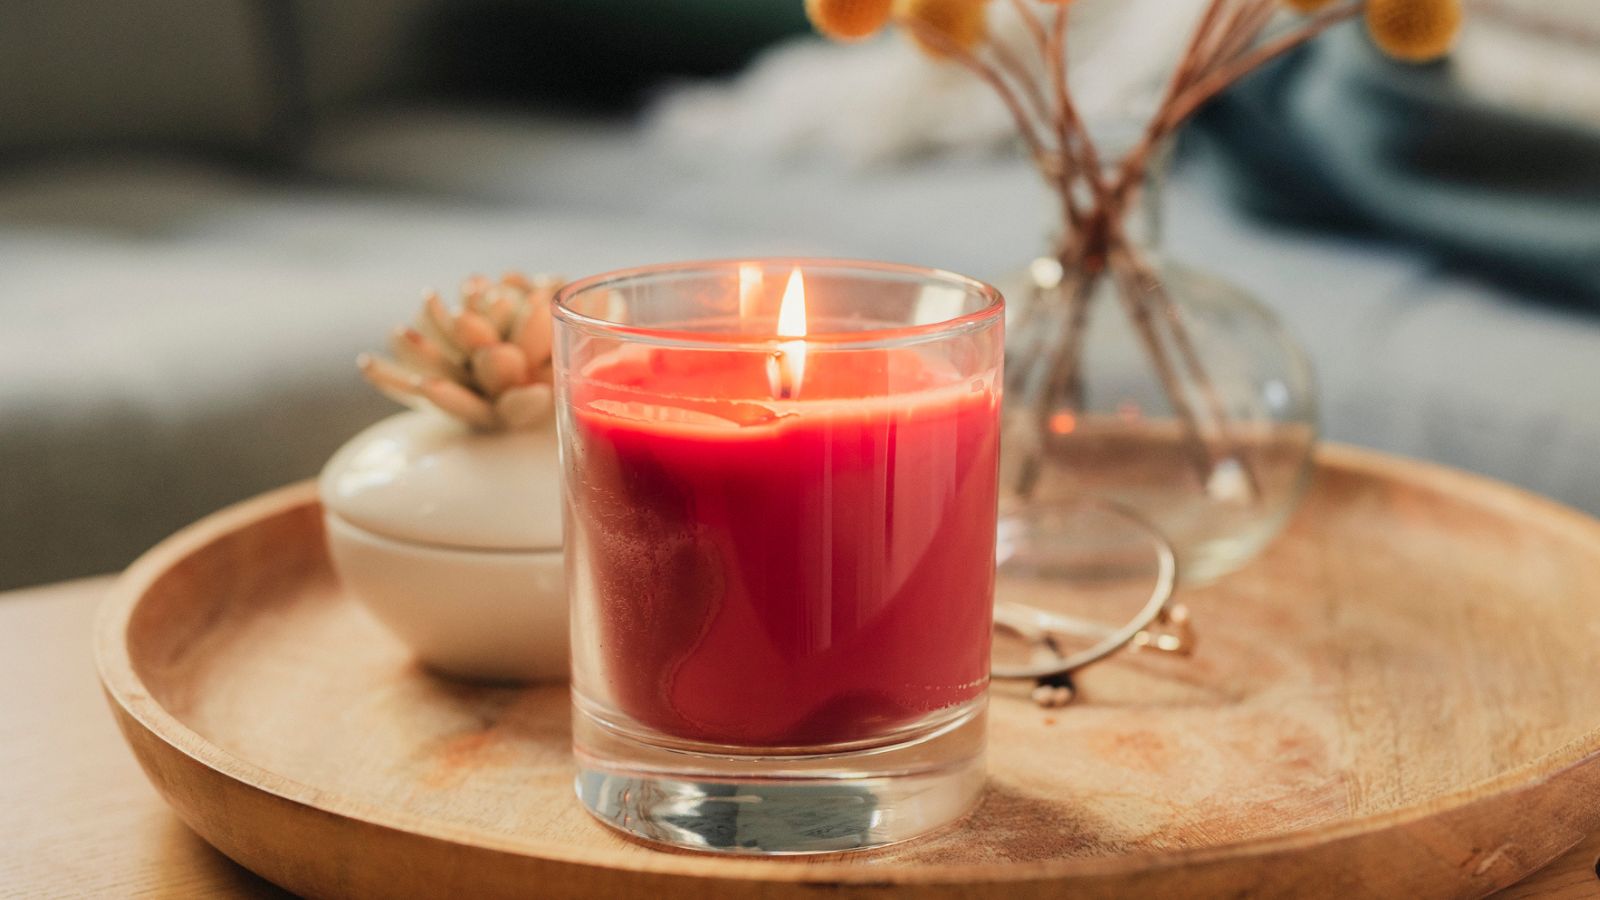 Are scented candles toxic? Advice from medical experts